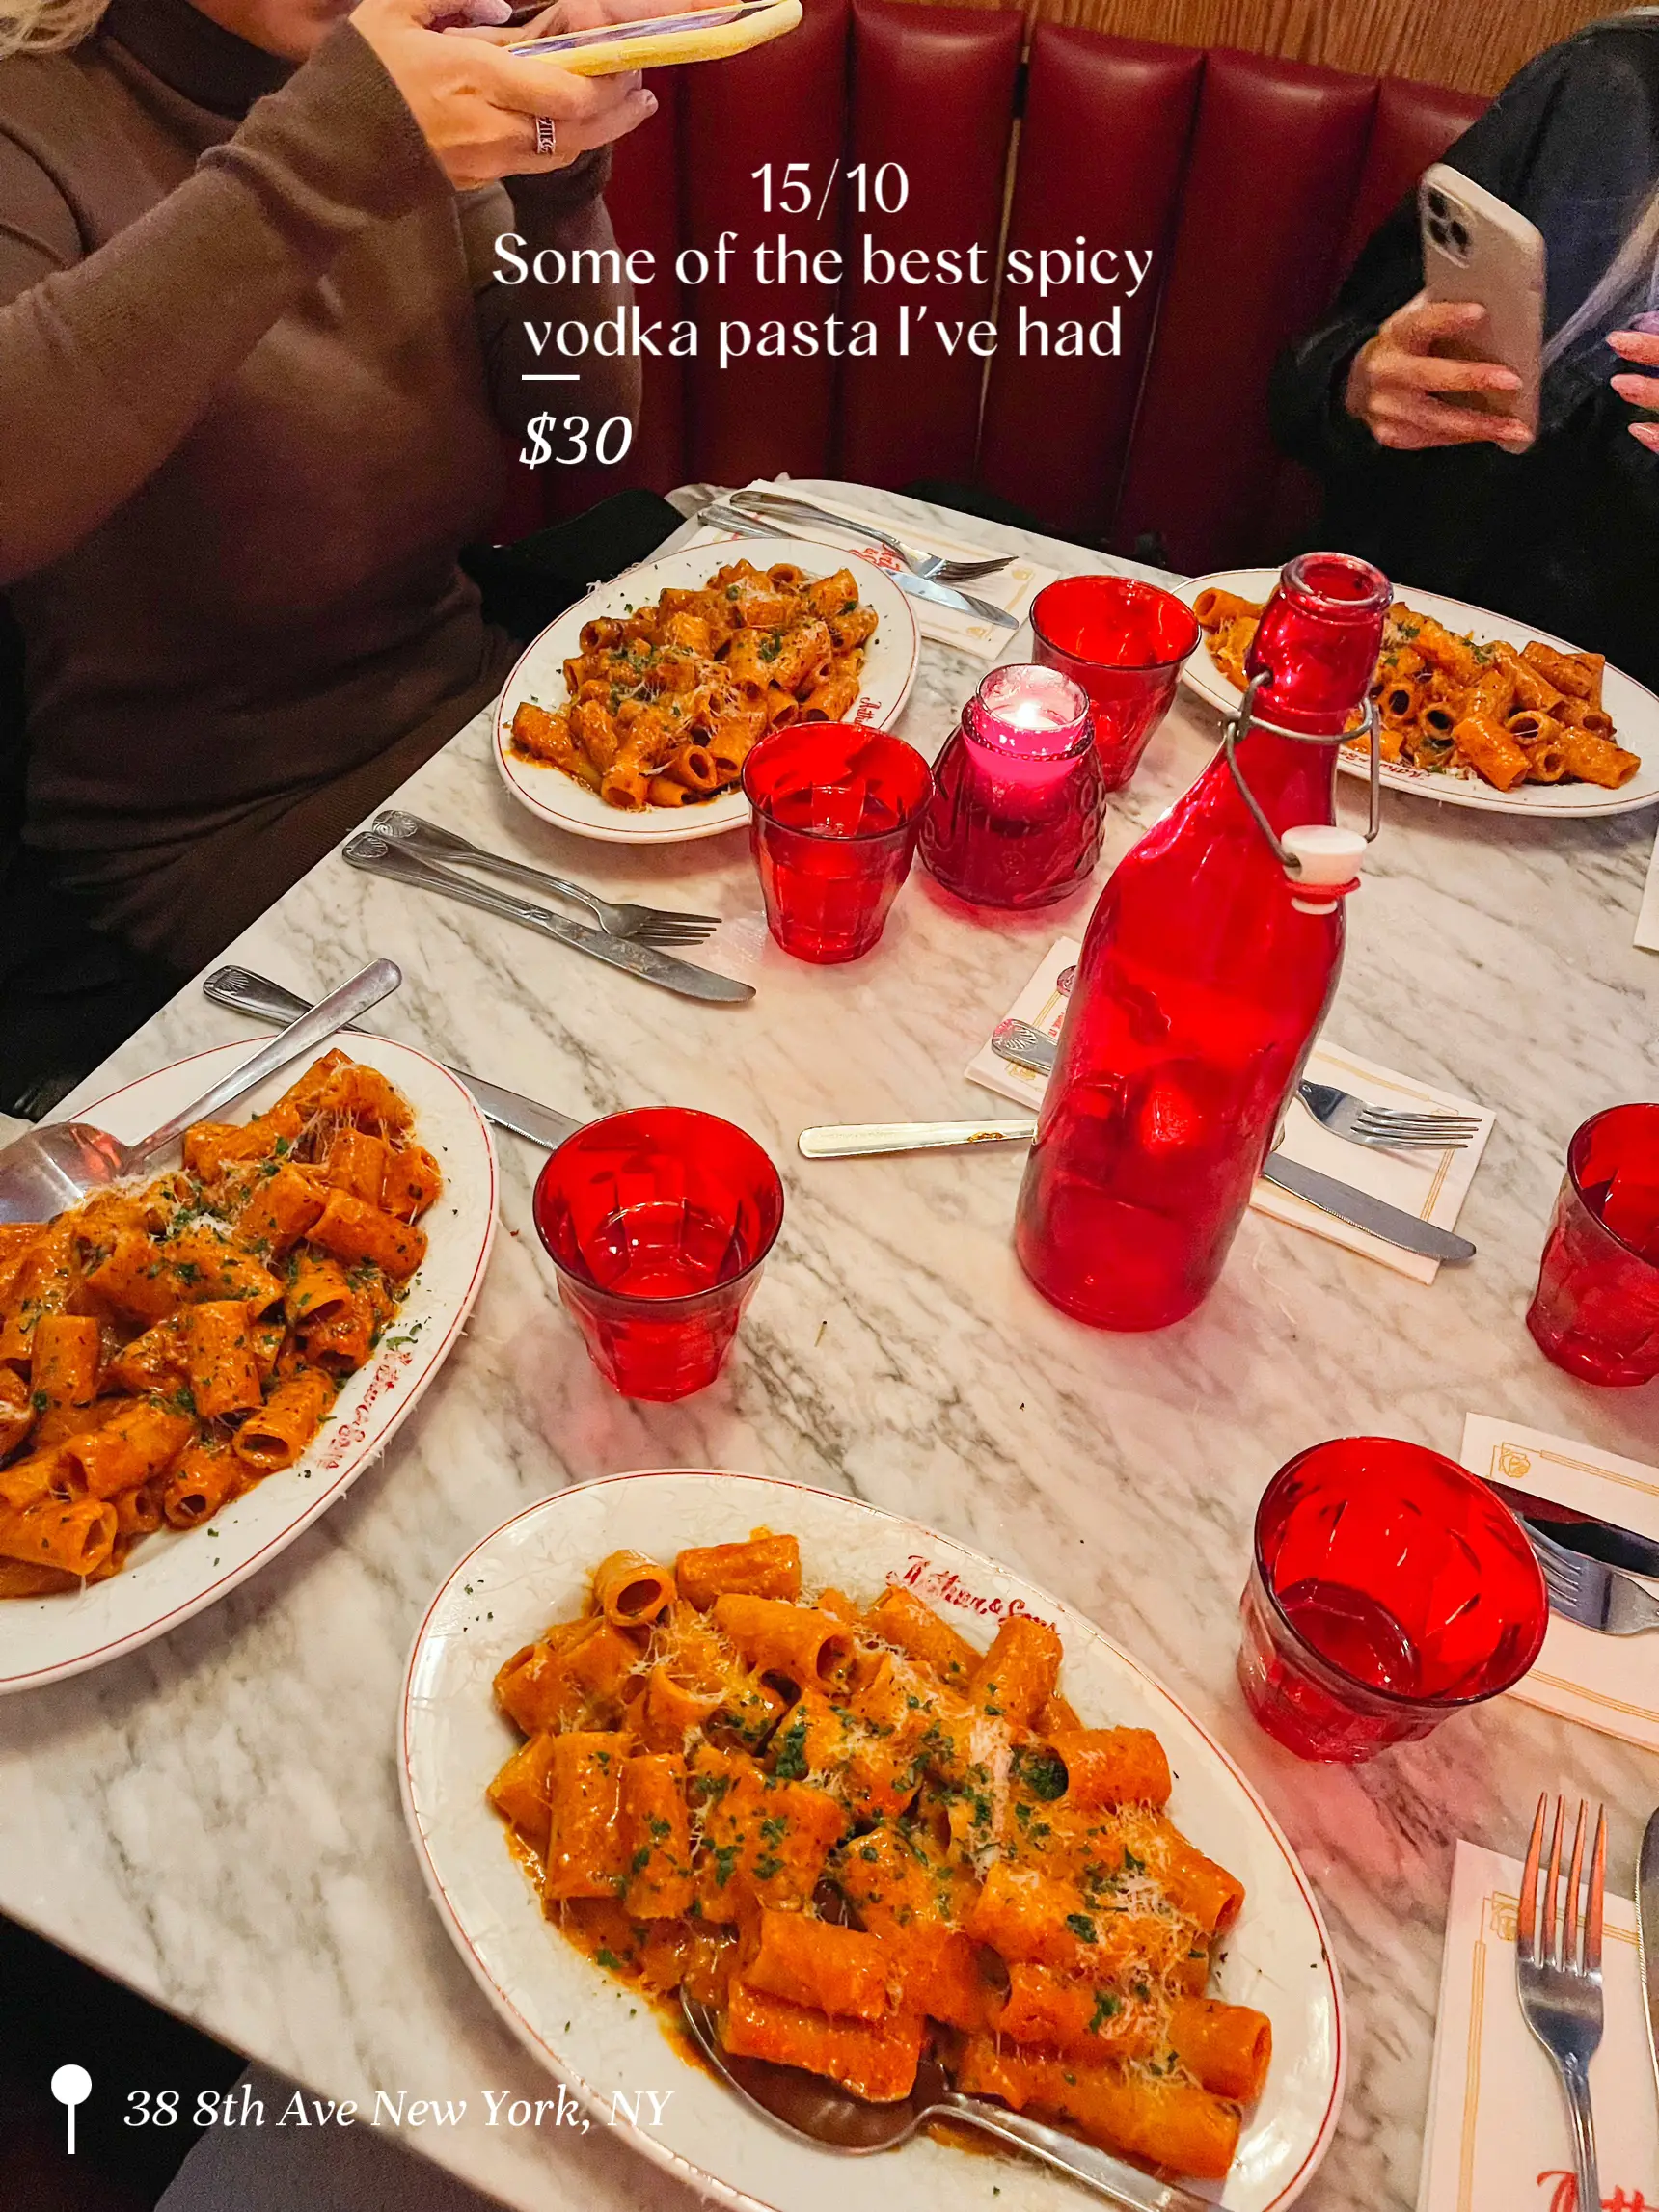  A table with a plate of spicy vodka pasta and a bottle of vodka.